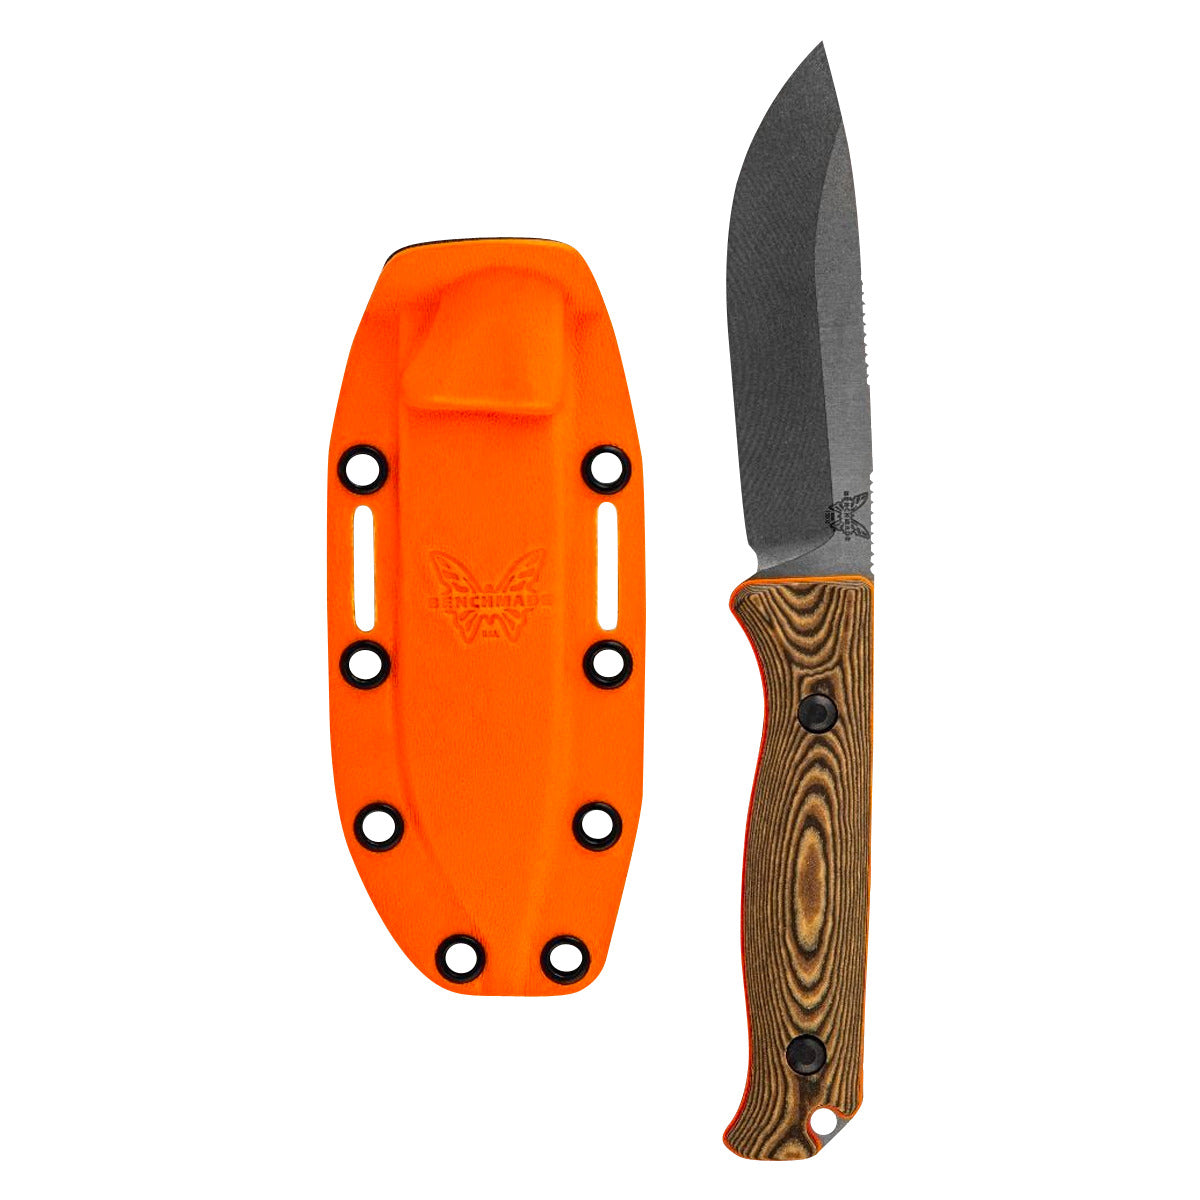 Benchmade Saddle Mountain Skinner in  by GOHUNT | Benchmade - GOHUNT Shop